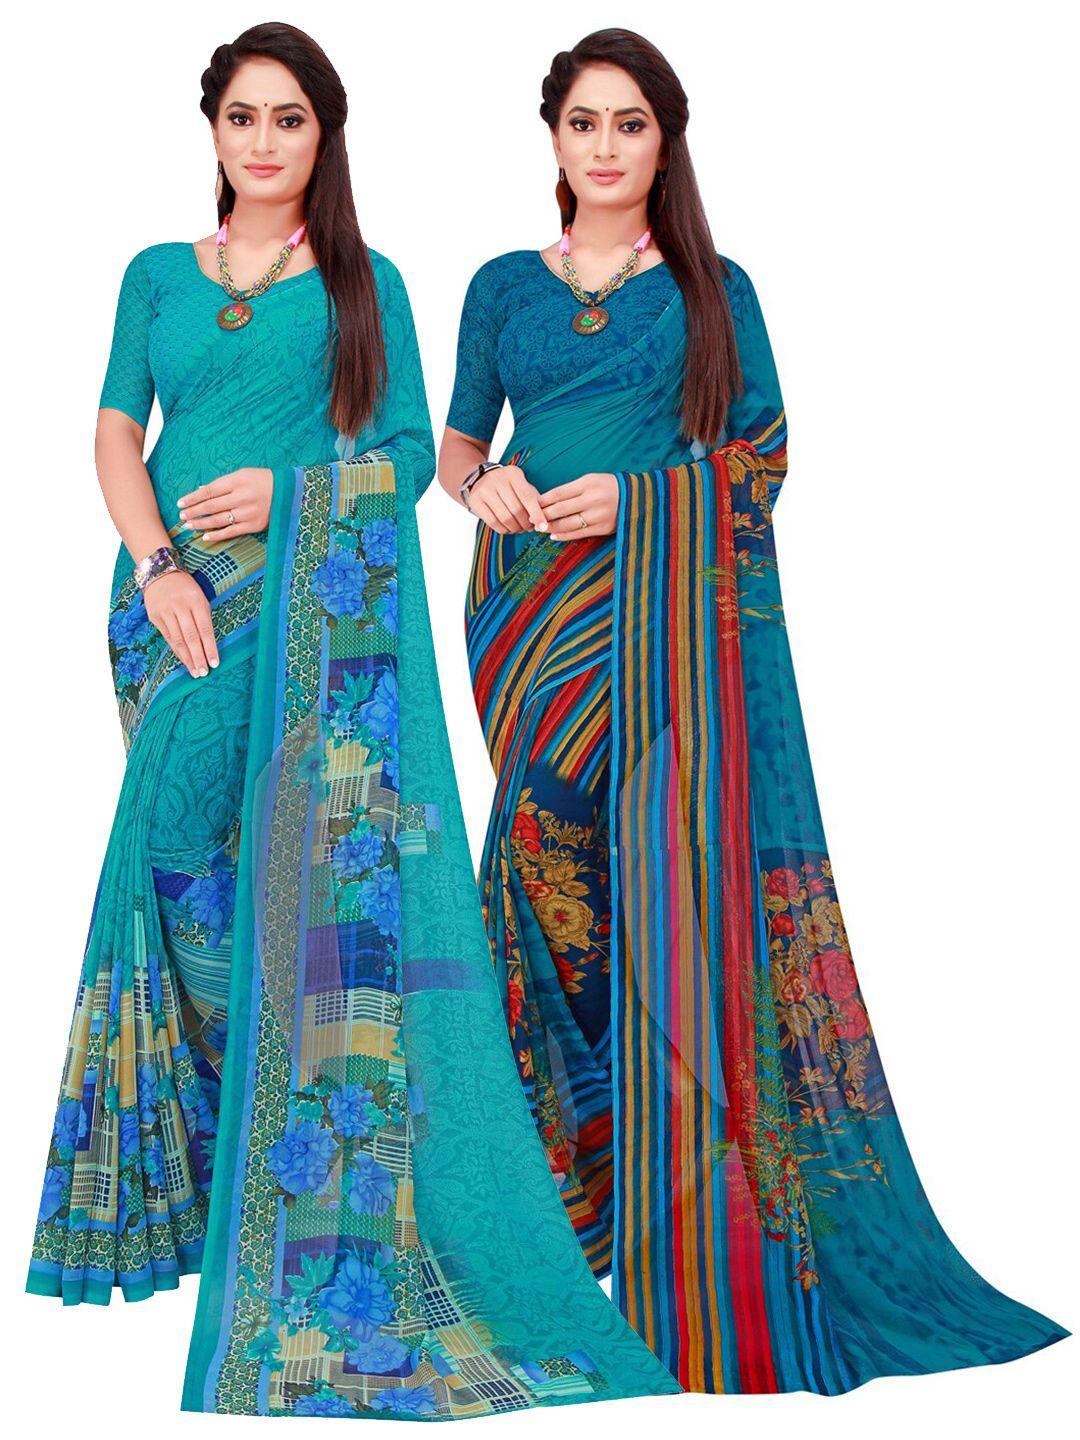 kalini pack of 2 pure georgette sarees